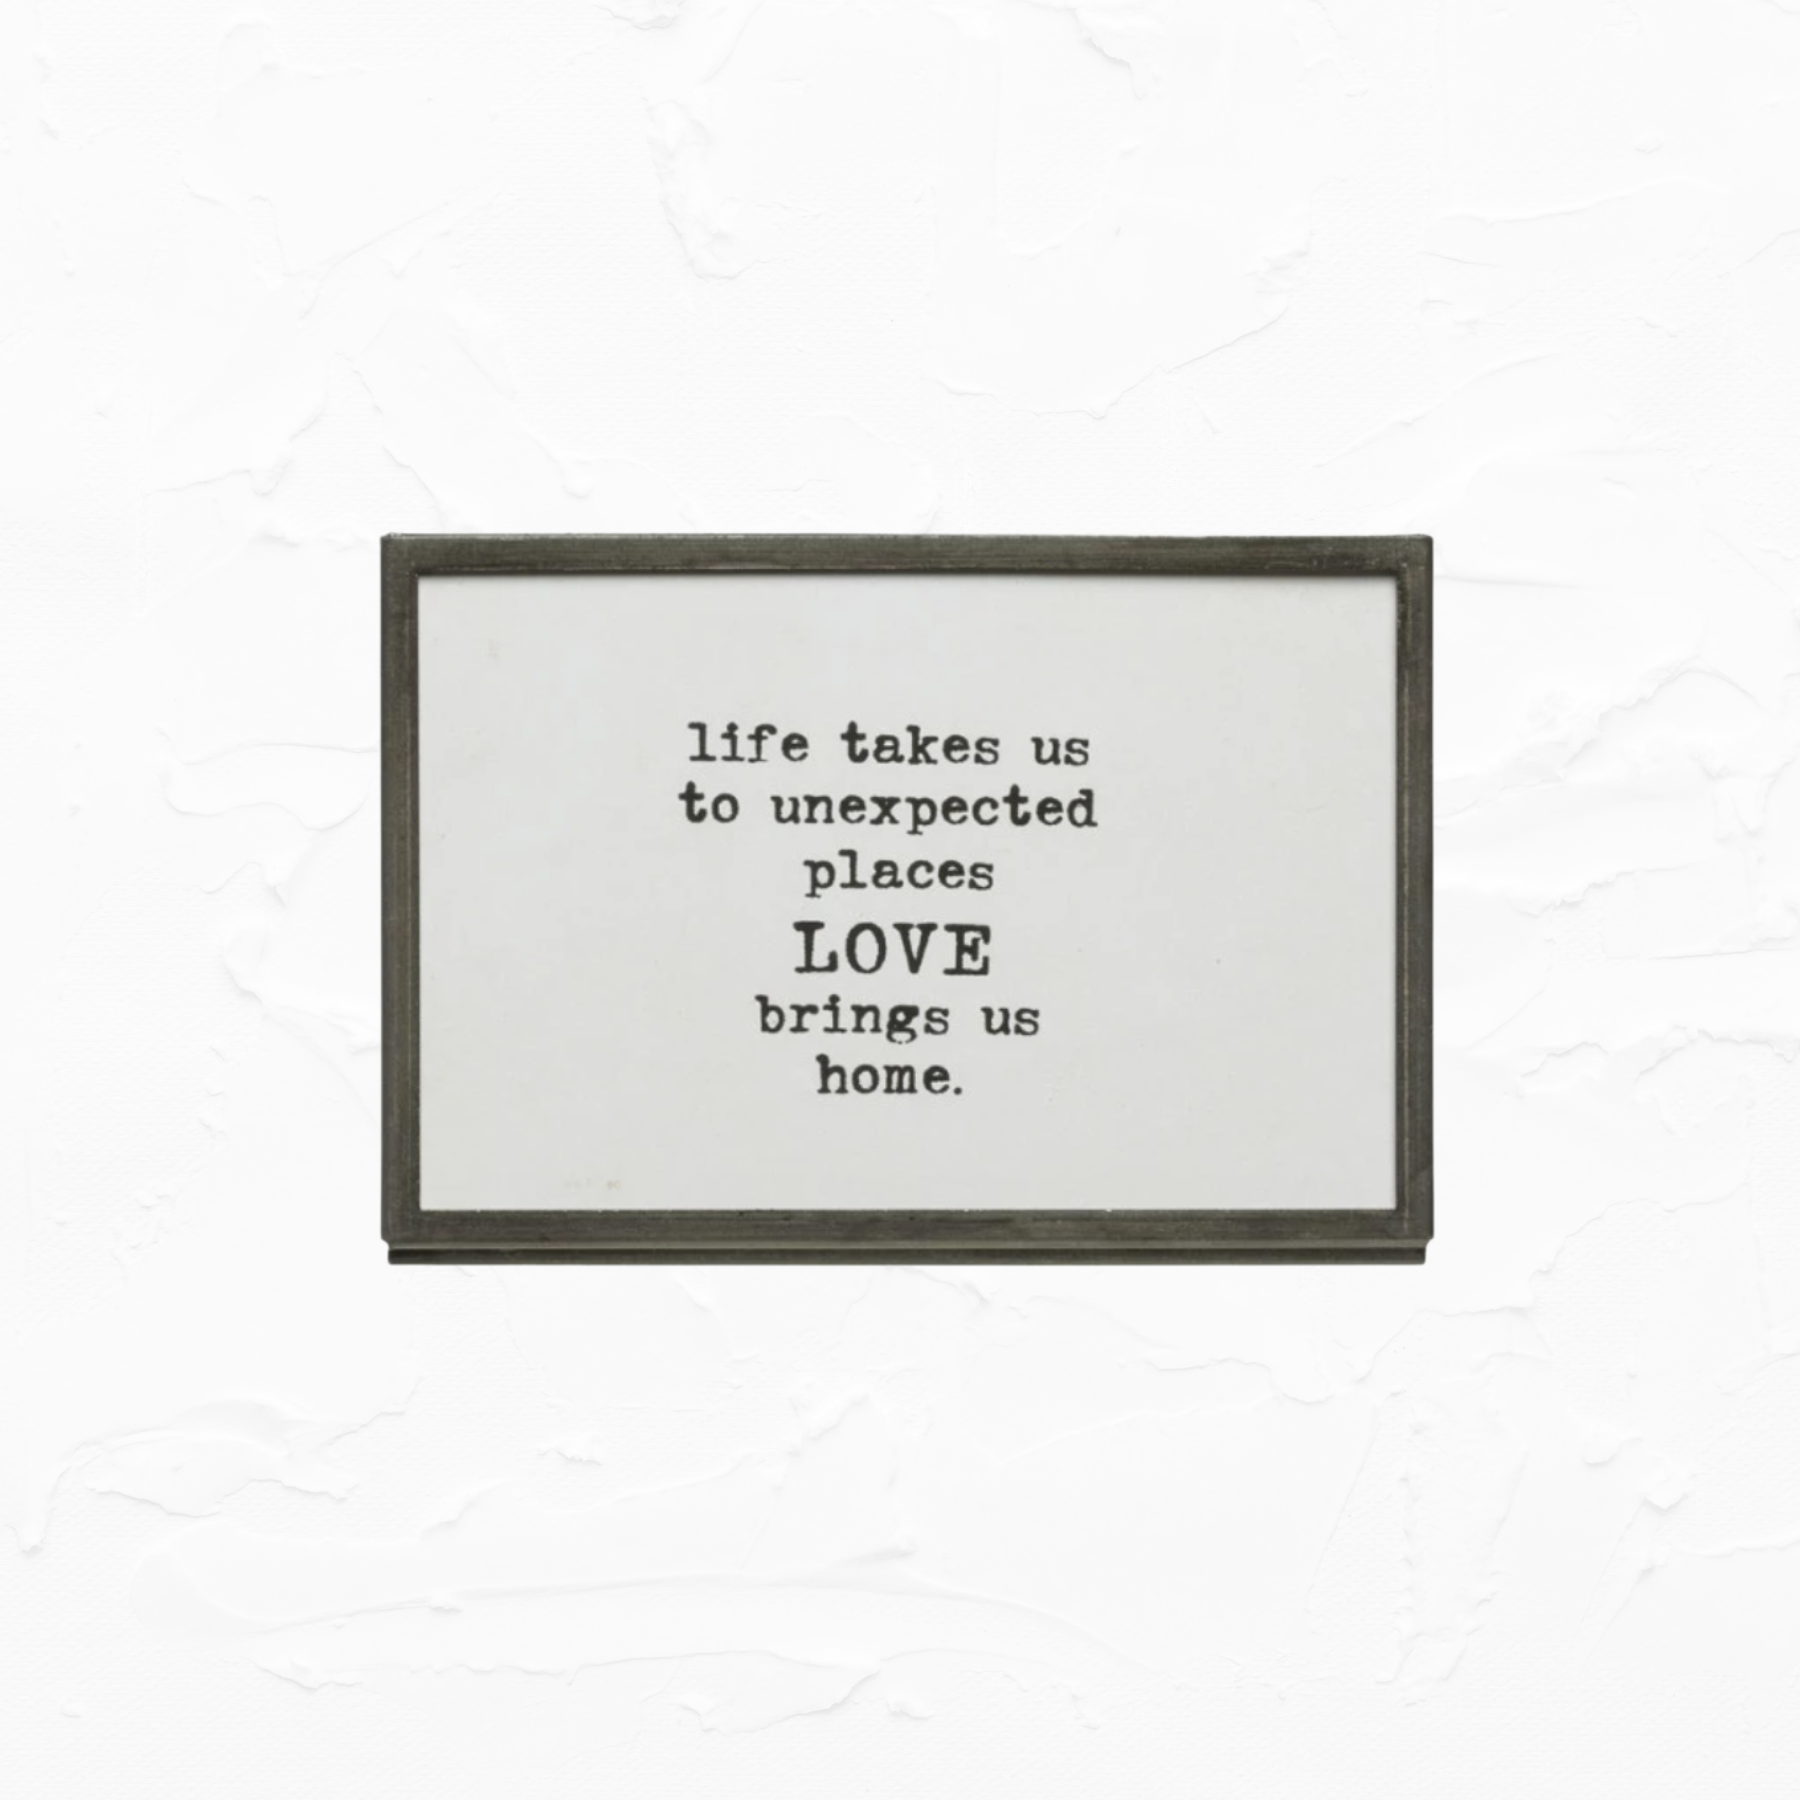 Framed Quote - LIFE TAKES US TO UNEXPECTED PLACES LOVE BRINGS US HOME